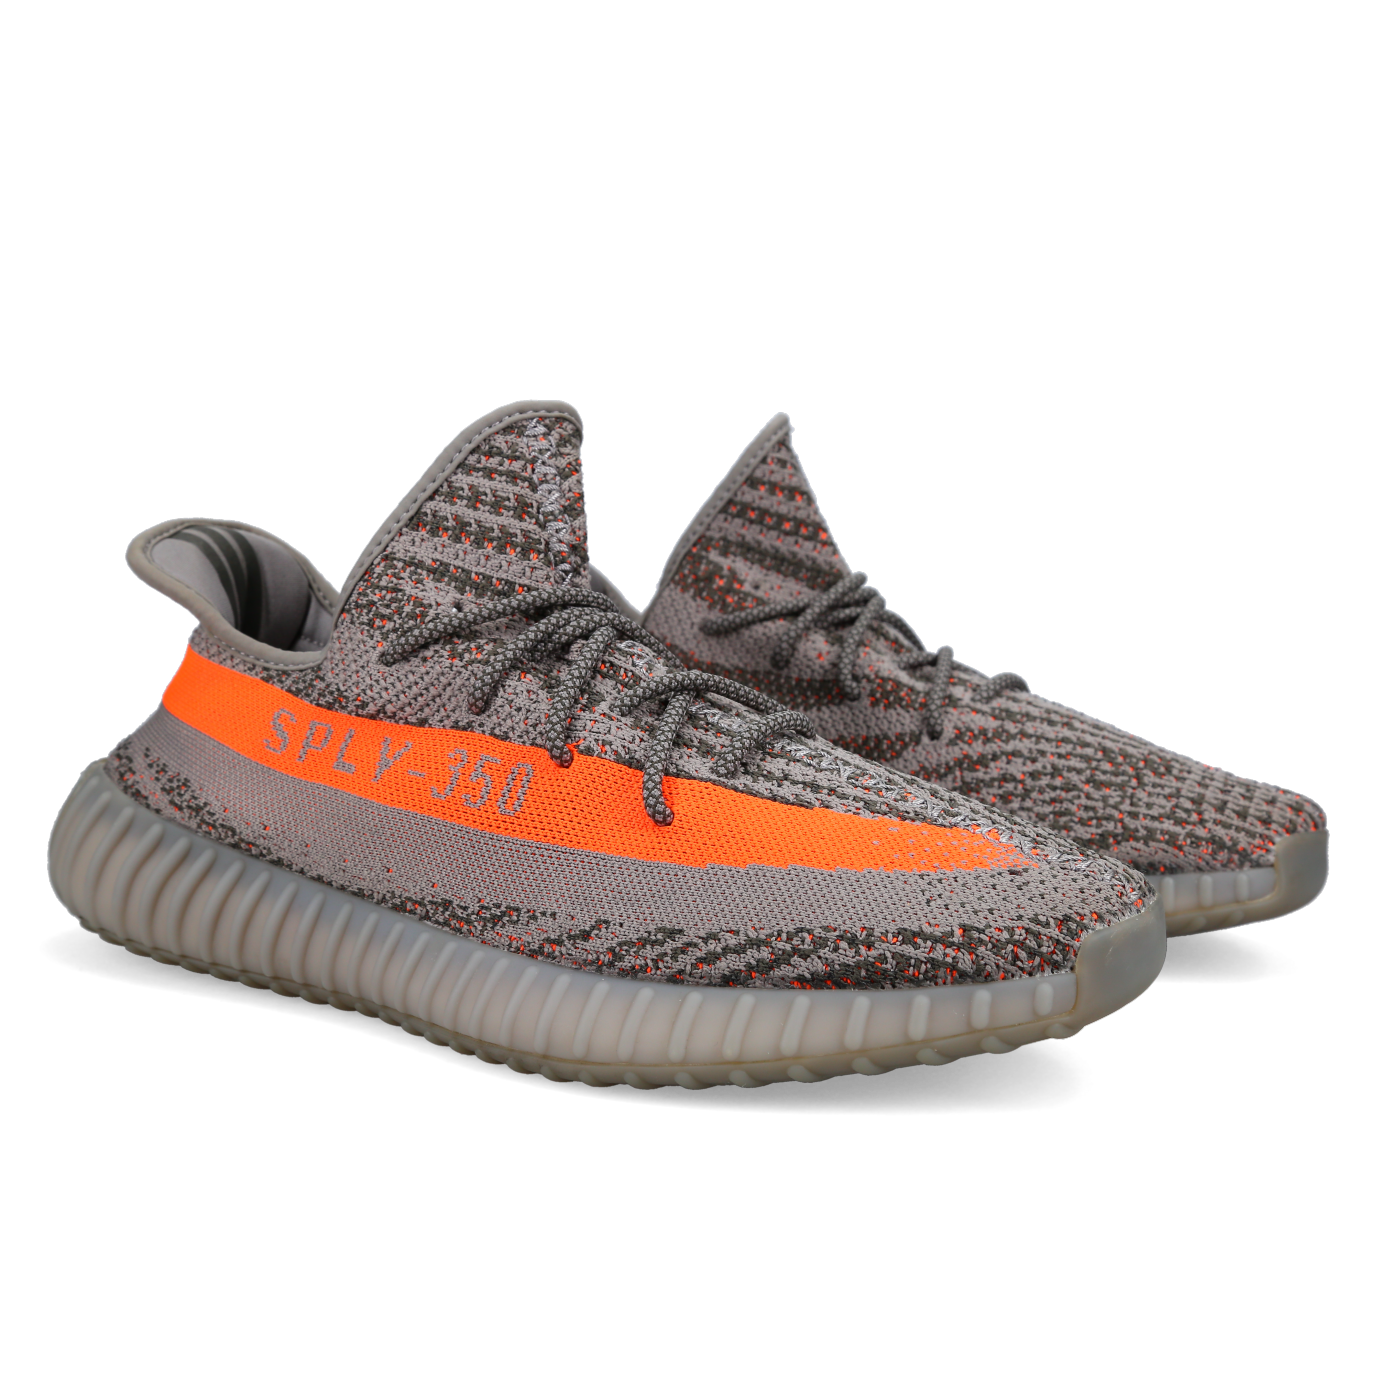 Adidas Yeezy Boost 350 V2 'Beluga Reflective' - Front View